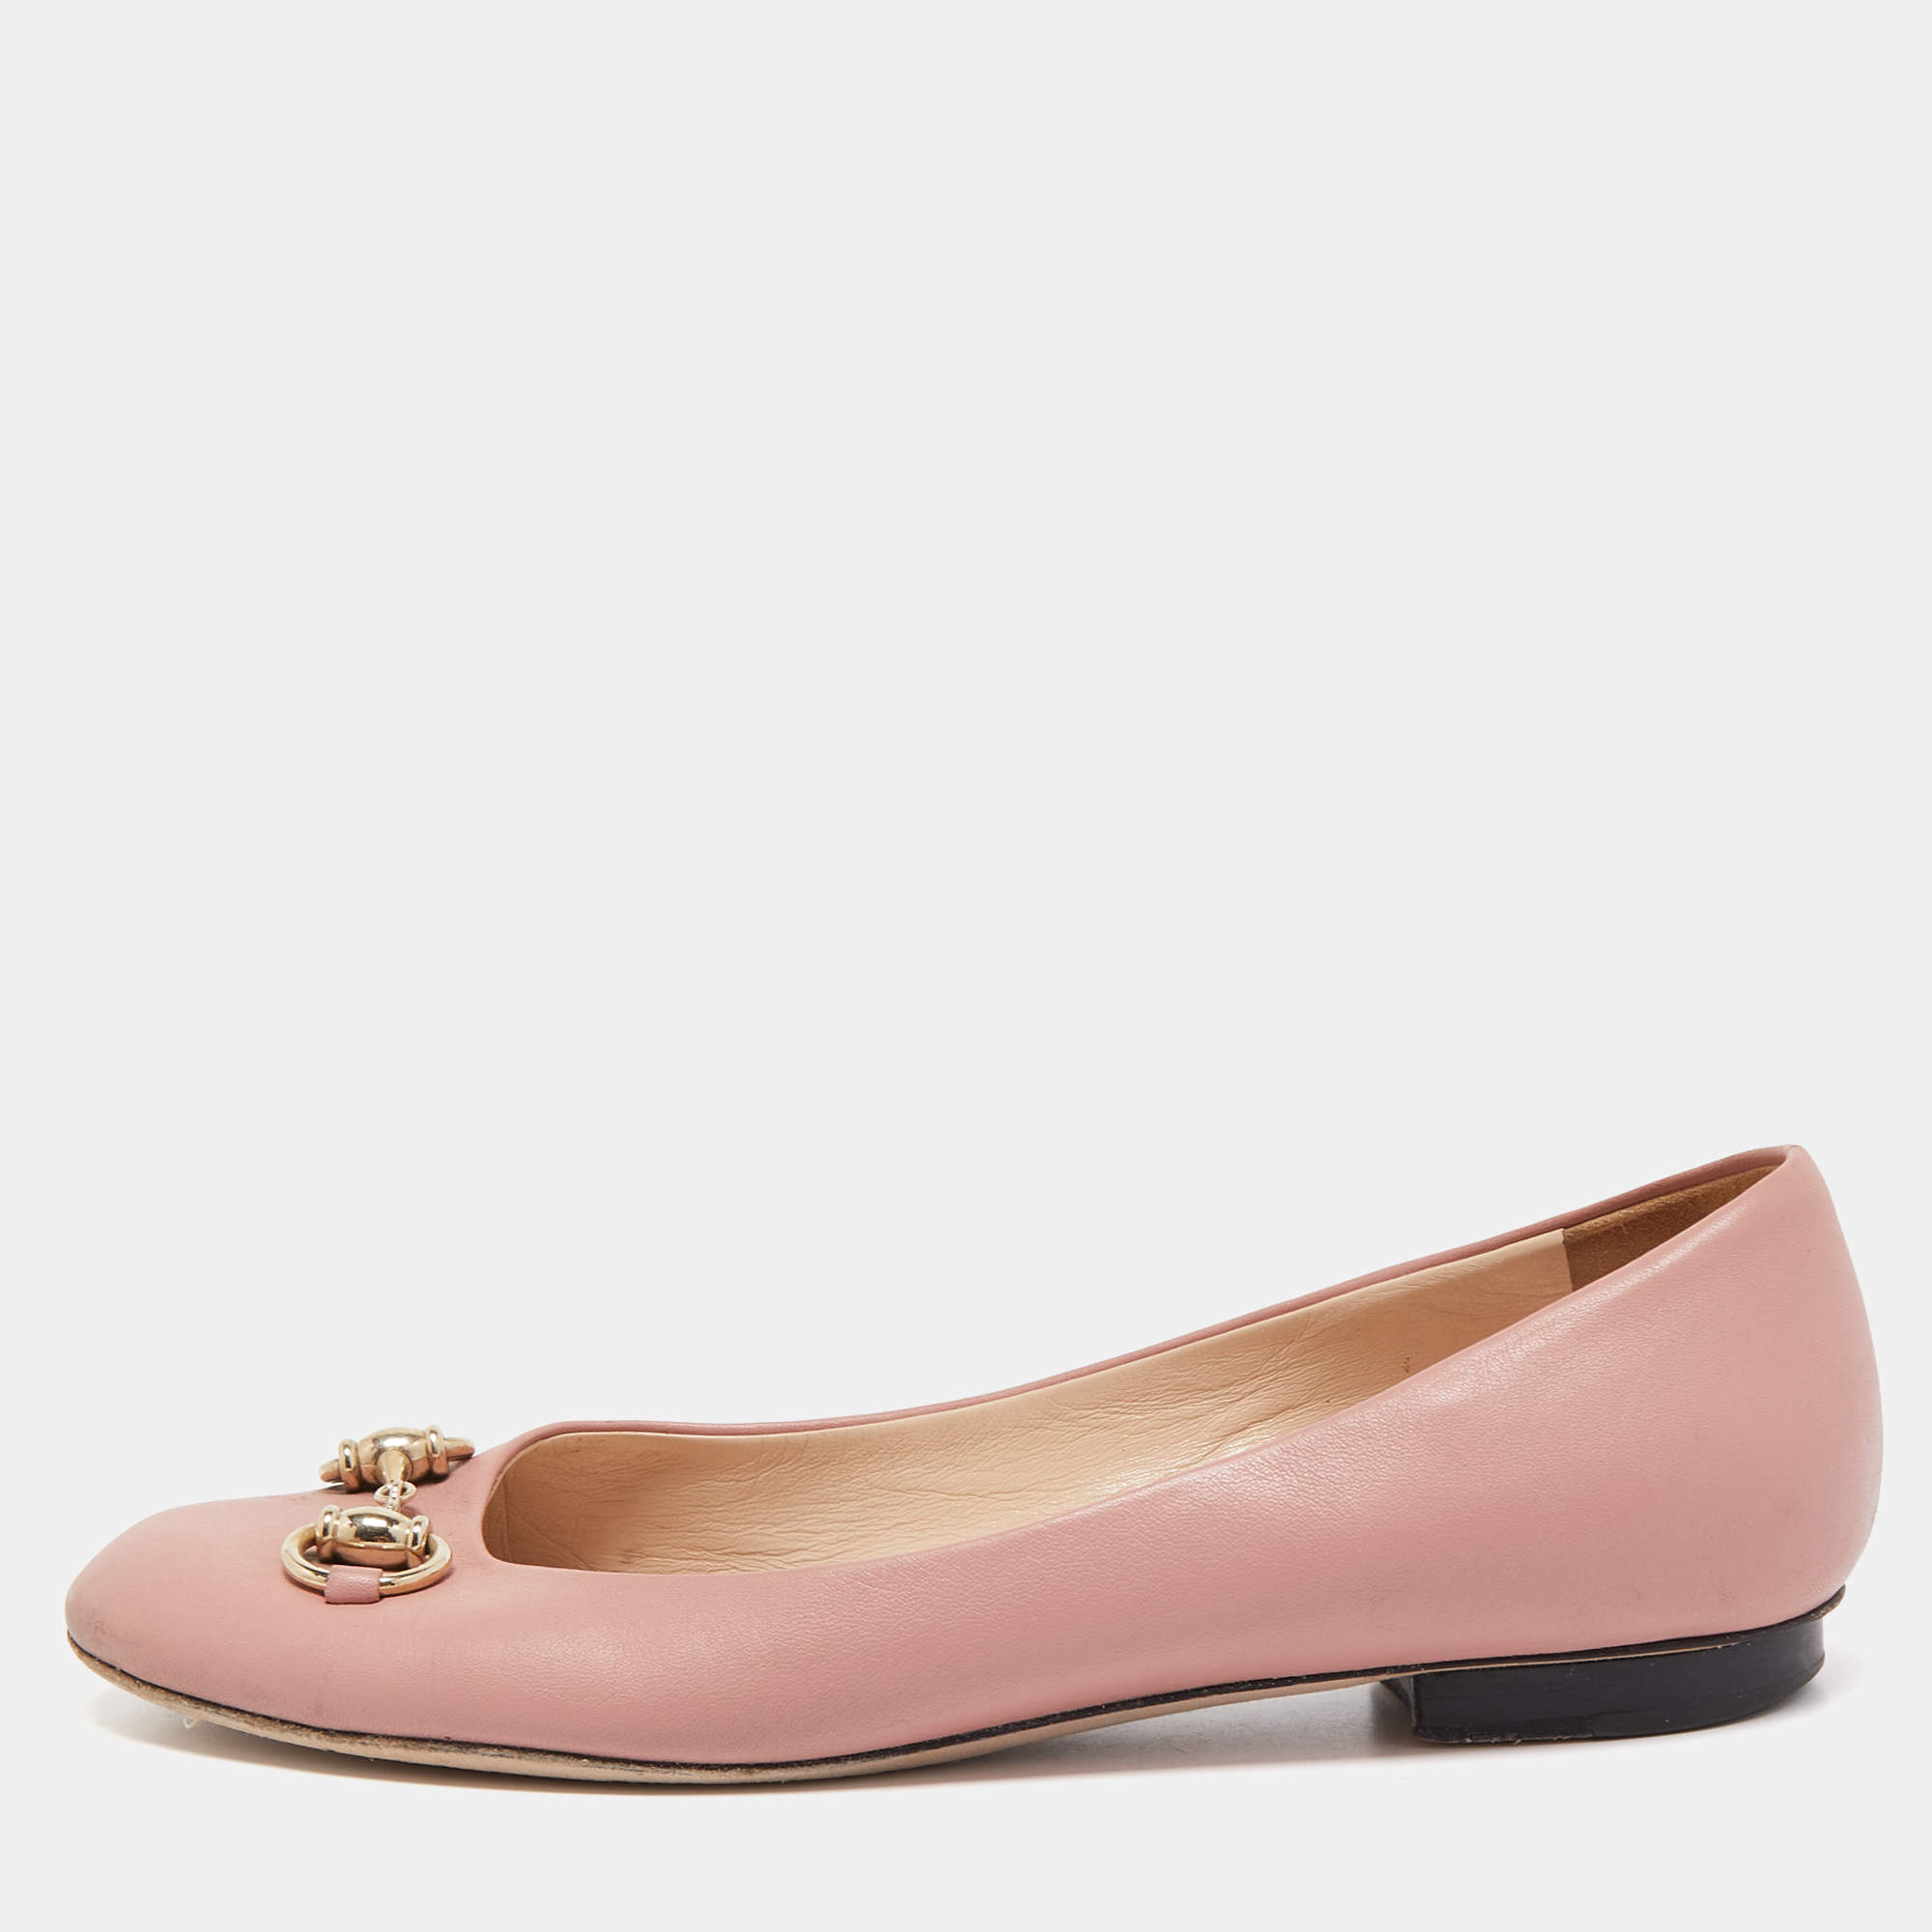 Gucci Pink Leather Horsebit Ballet Flats Size 36.5 Gucci | The Luxury ...